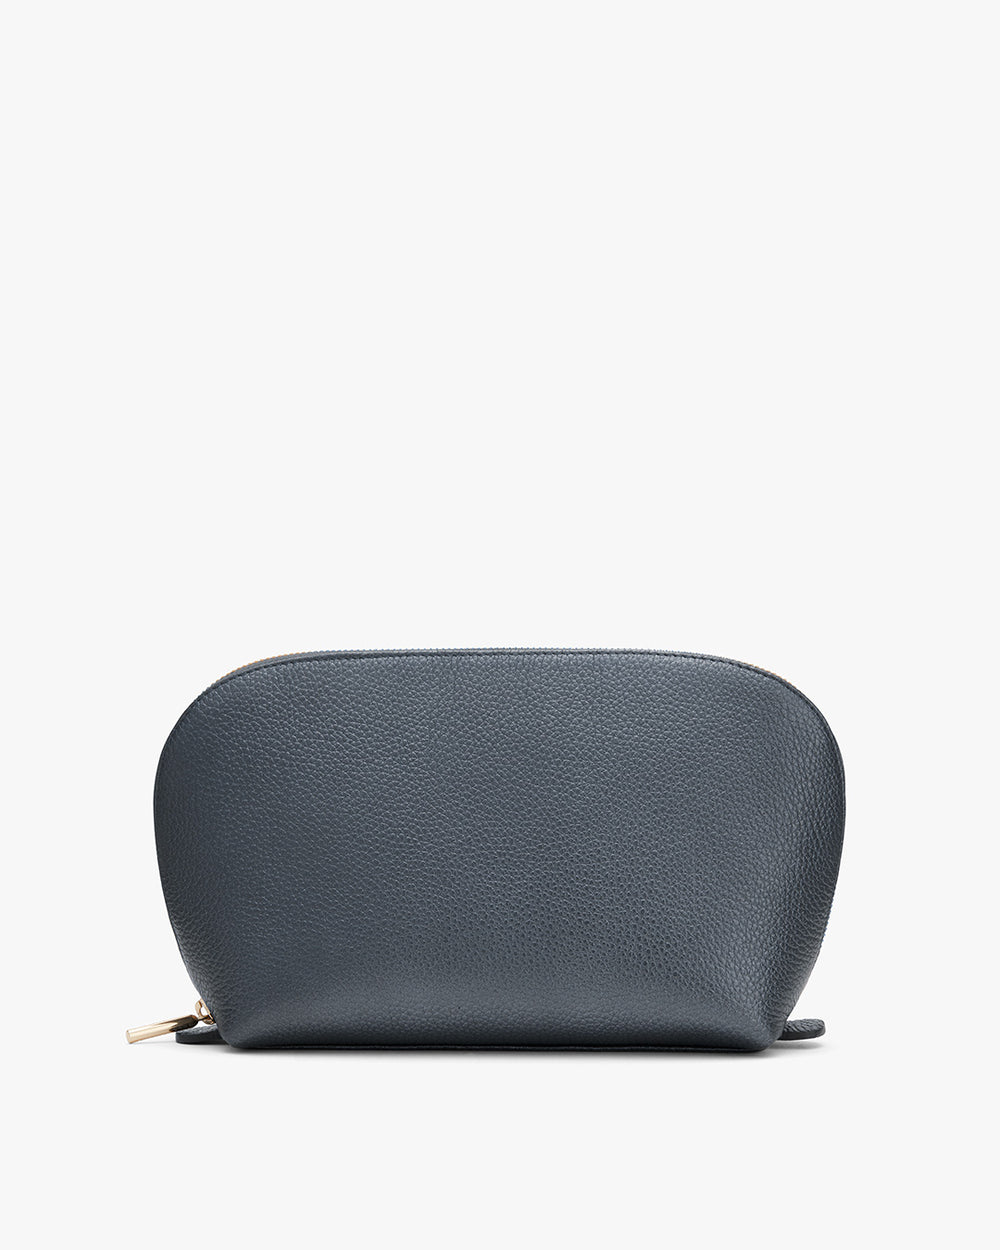 Cosmetic bag with zipper on a plain background